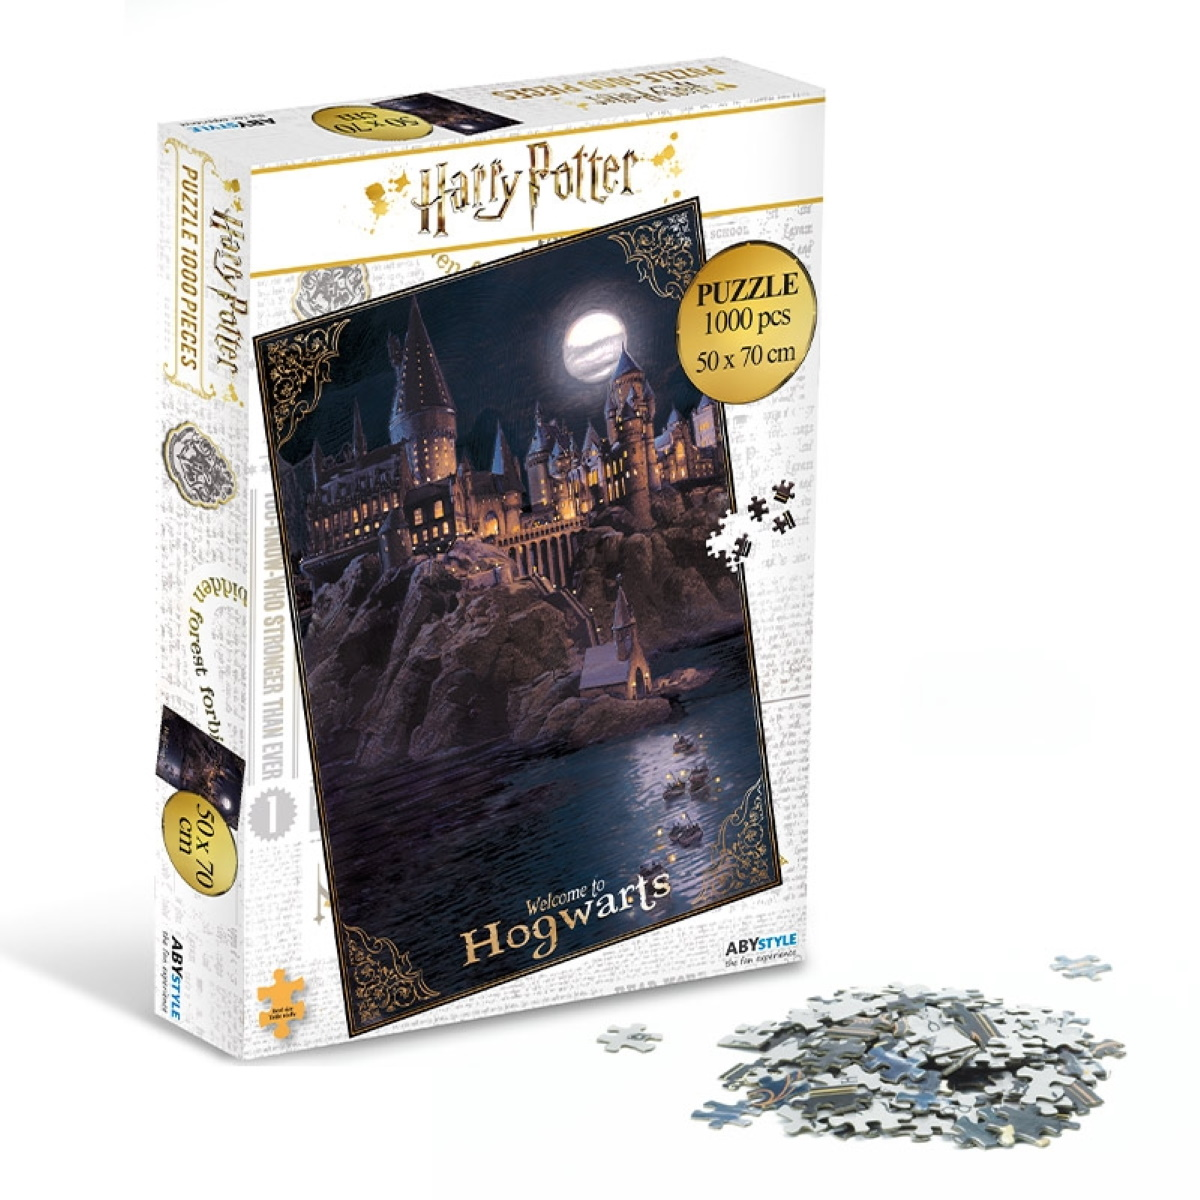 ABYSTYLE Hogwarts Schloss 1000 Teile Puzzle Puzzle